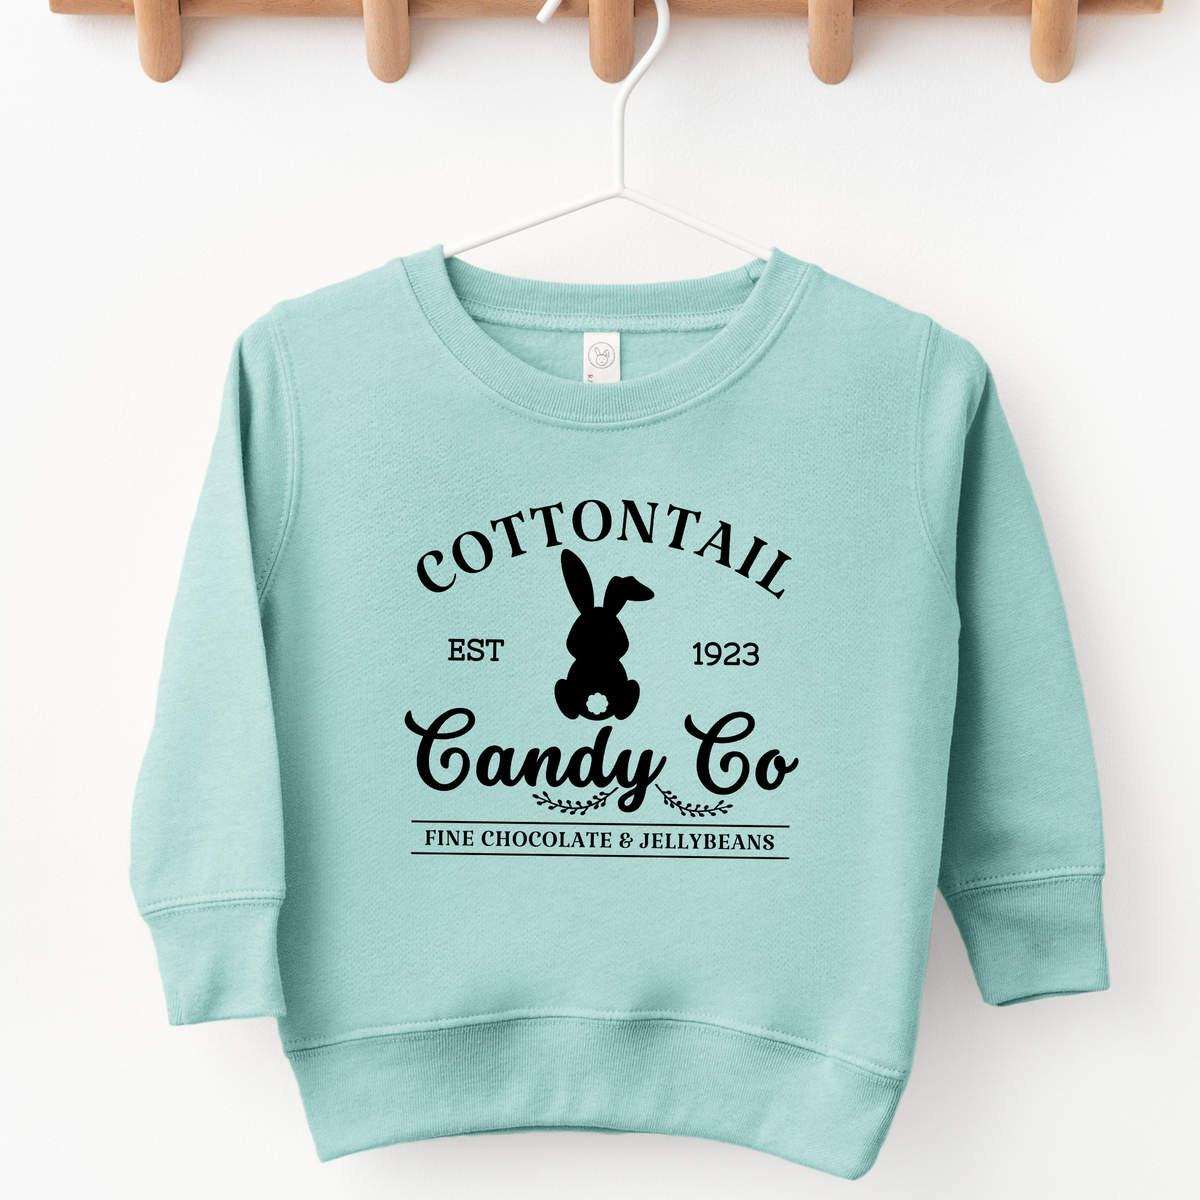 Cottontail Candy Co Easter Peppermint Sweatshirt / Jumper